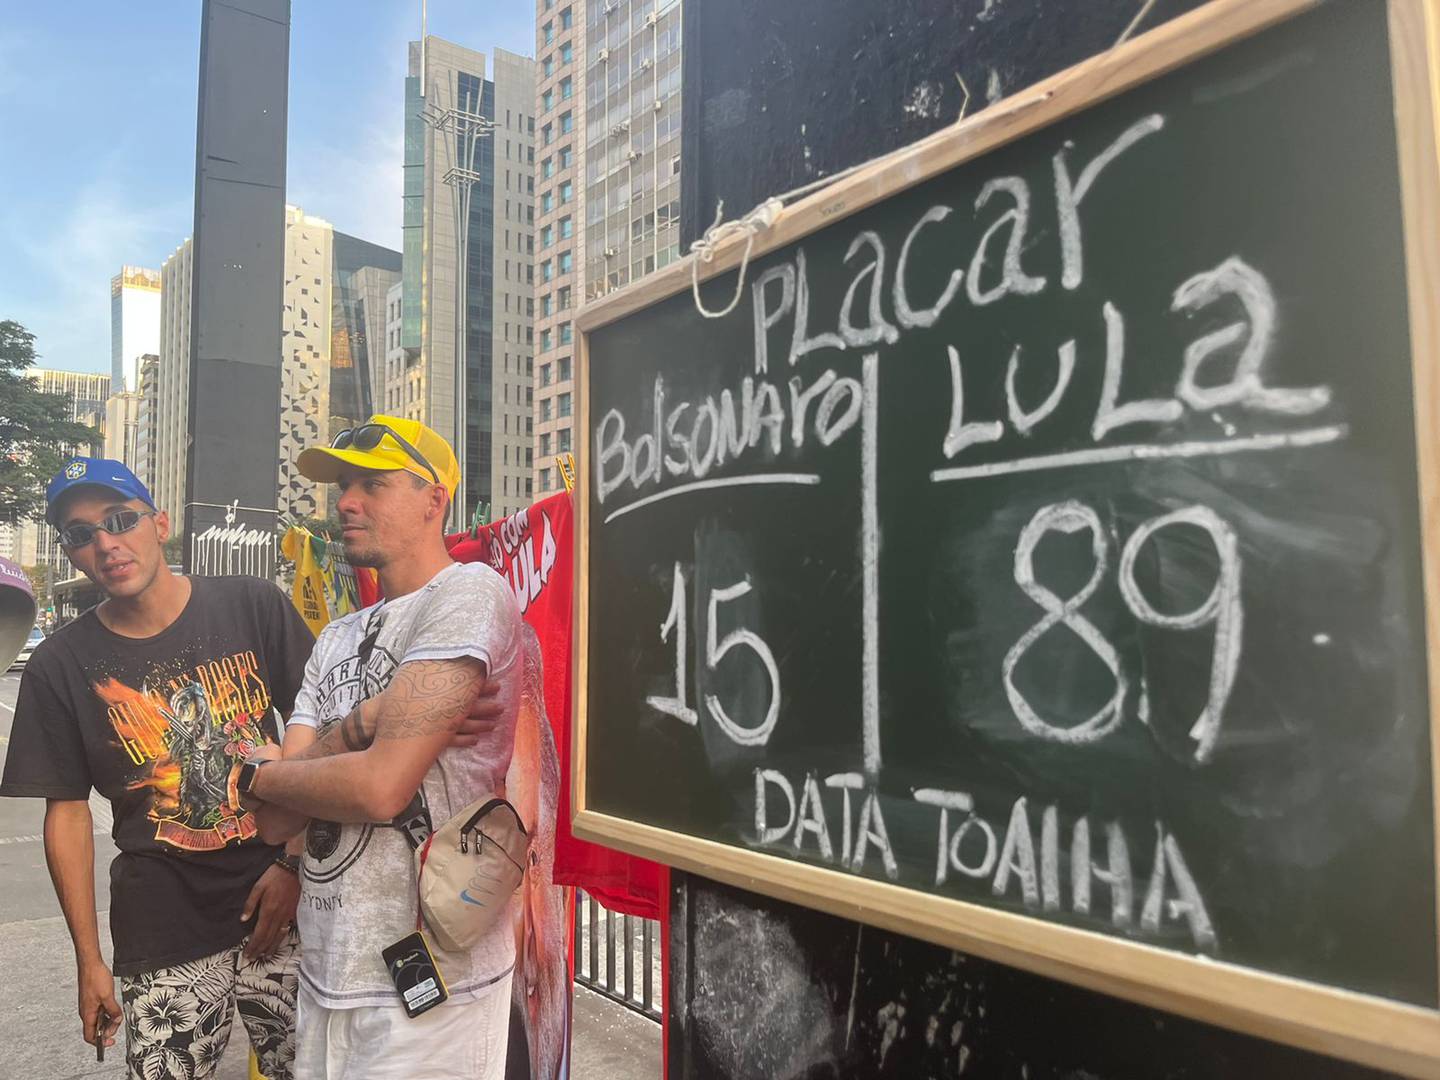 Entrepreneurs Saulo Adriel and Fernando Lopes Prado, who sell towels with the faces of candidates Bolsonaro and Lula on Paulista Avenue in São Paulo.